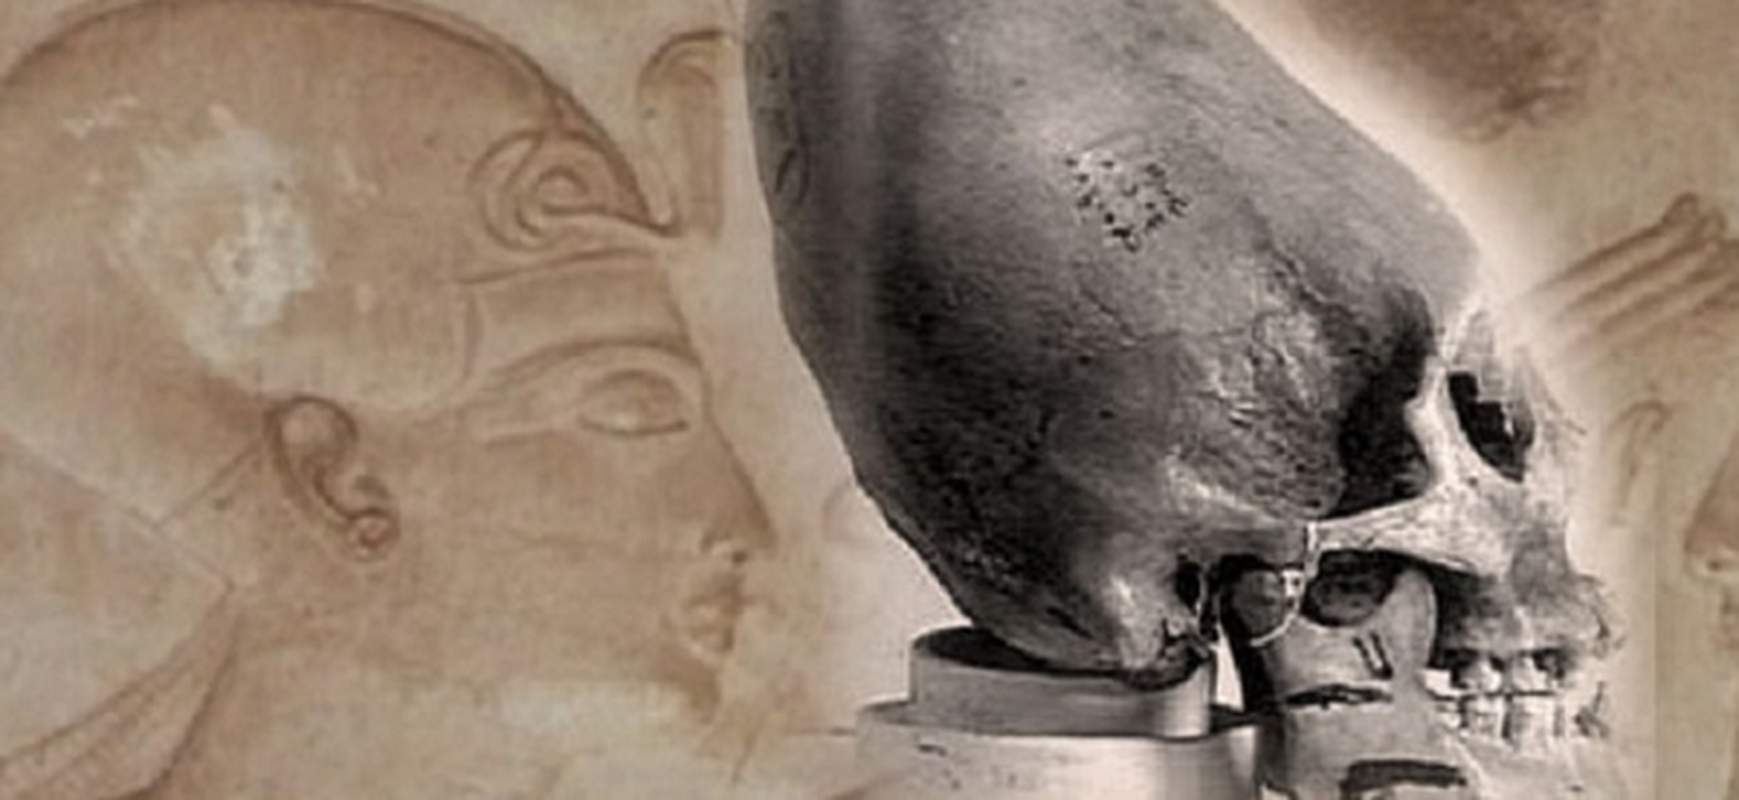 Hot: Announcing evidence of aliens appearing in Egypt since ancient times?